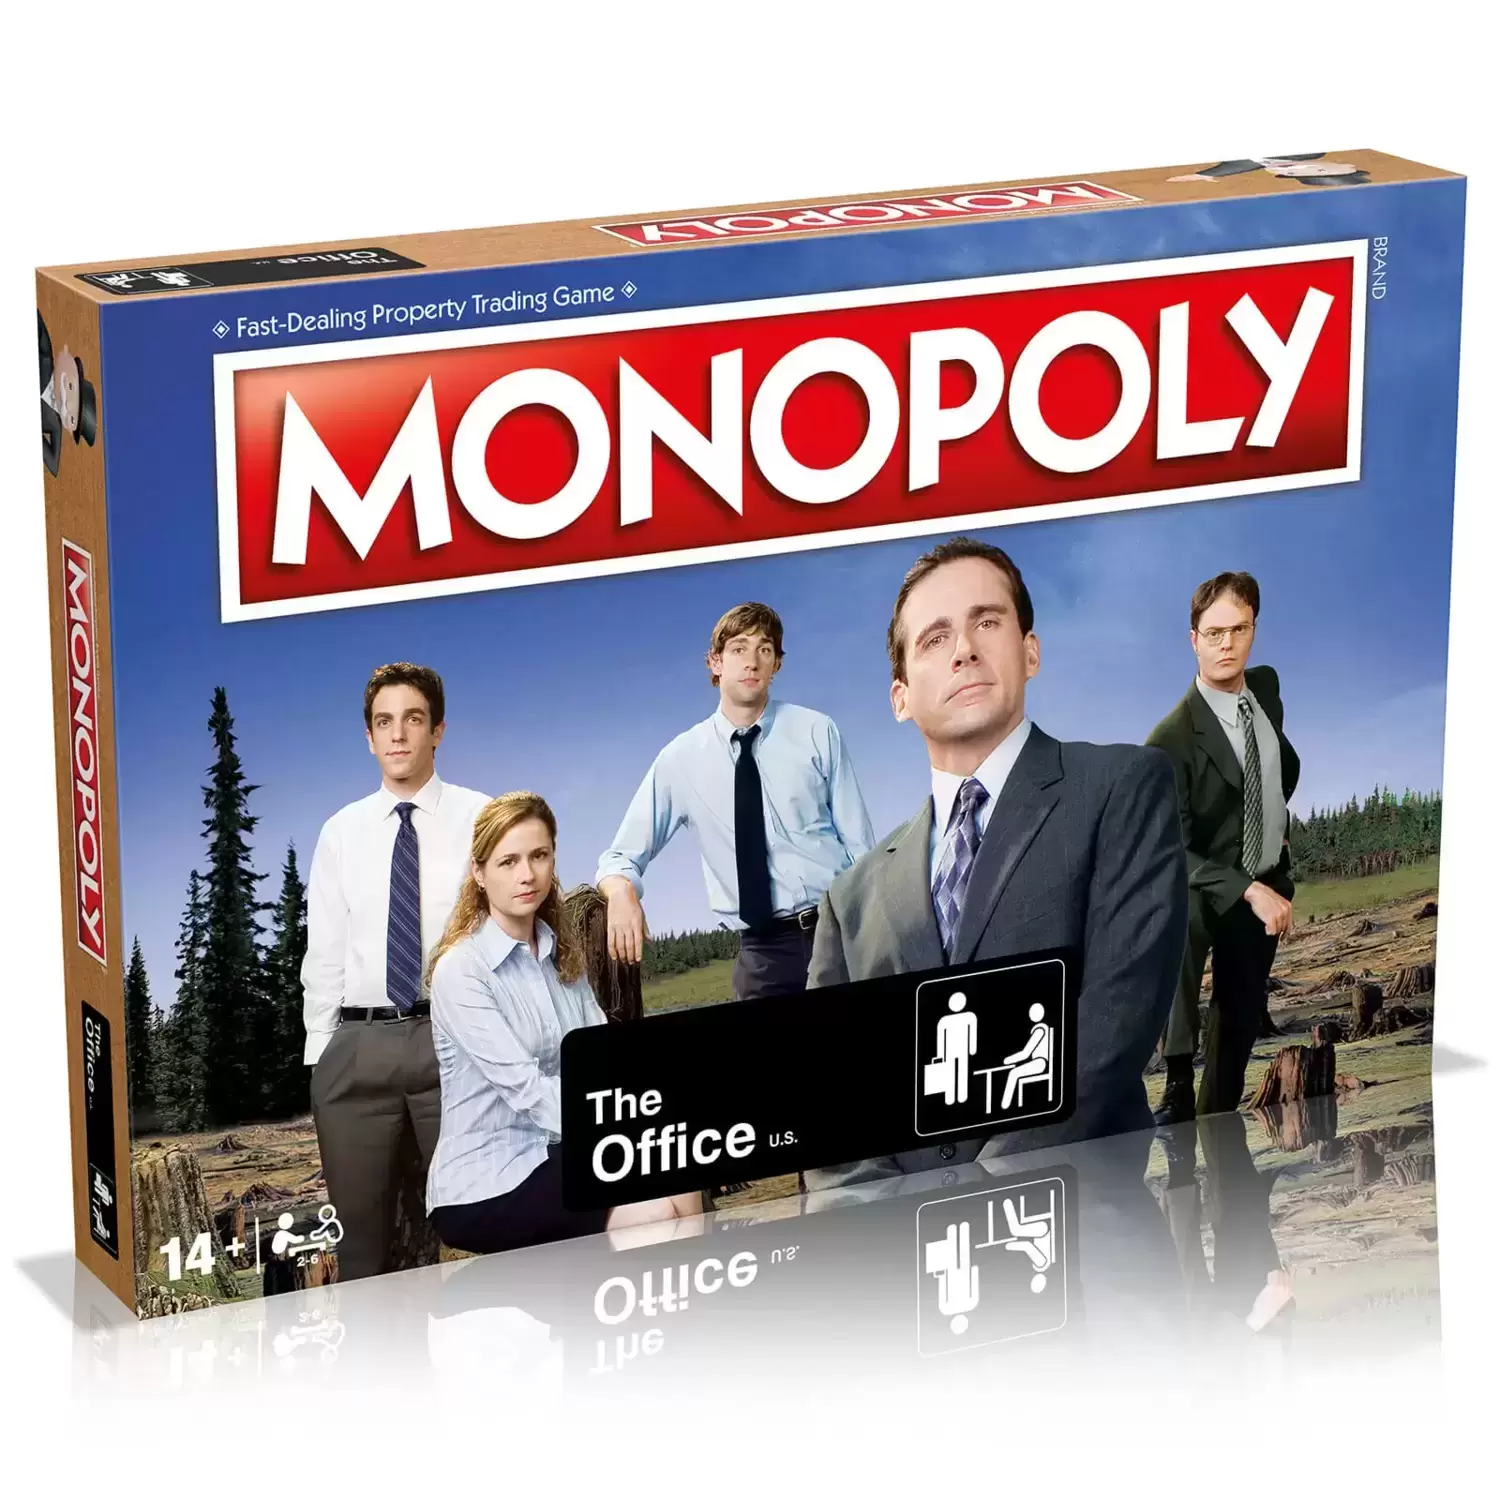 Monopoly Films & Séries TV - Monopoly The Office